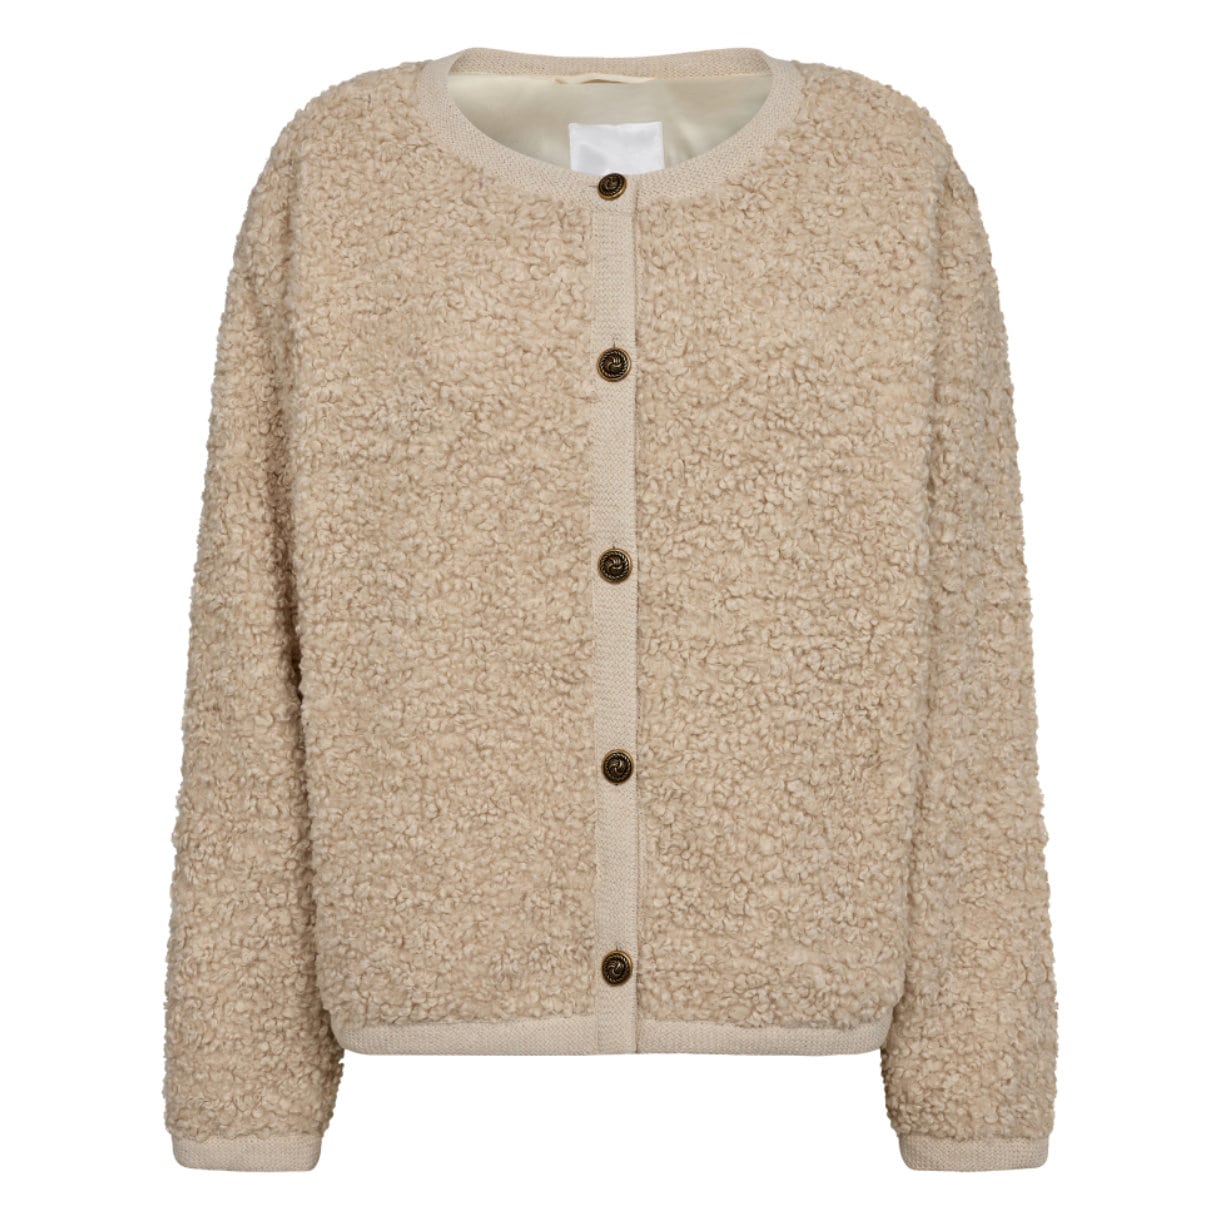 Co'couture | TimmyCC Teddy Jacket - Bone | Buur